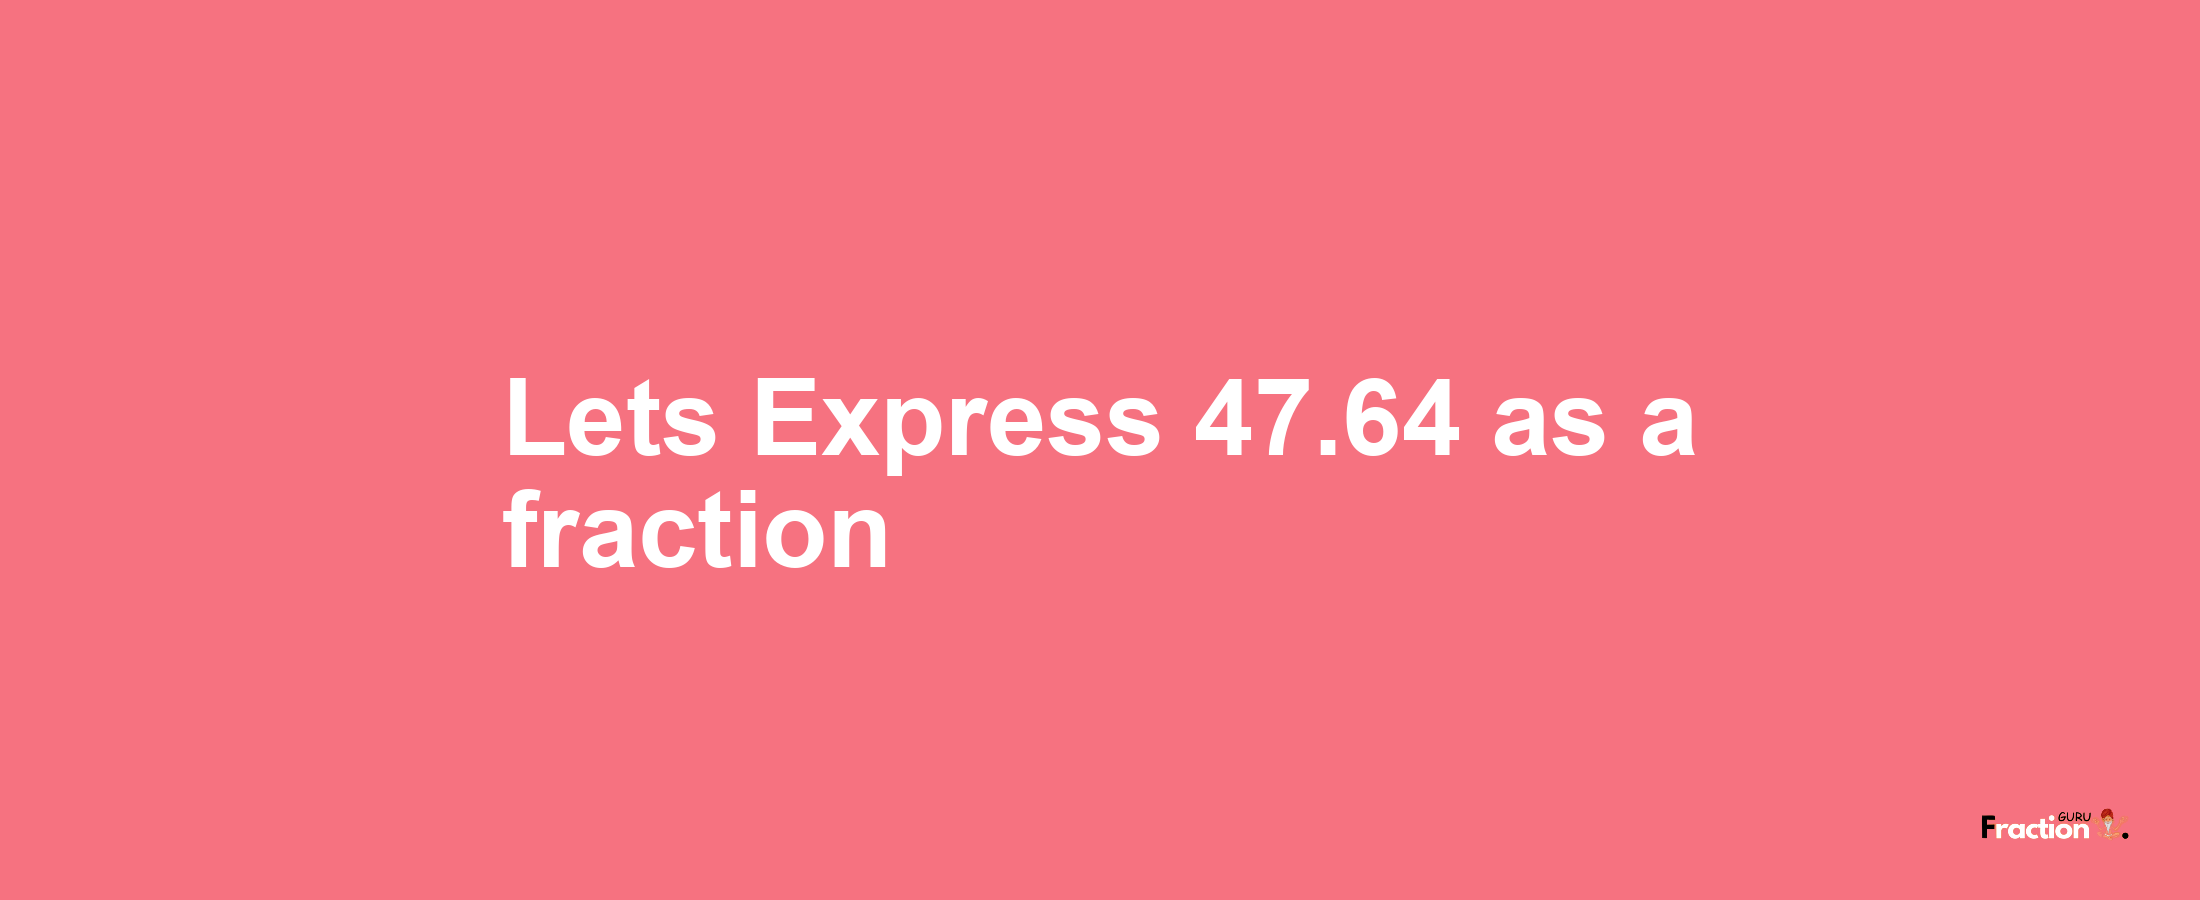 Lets Express 47.64 as afraction